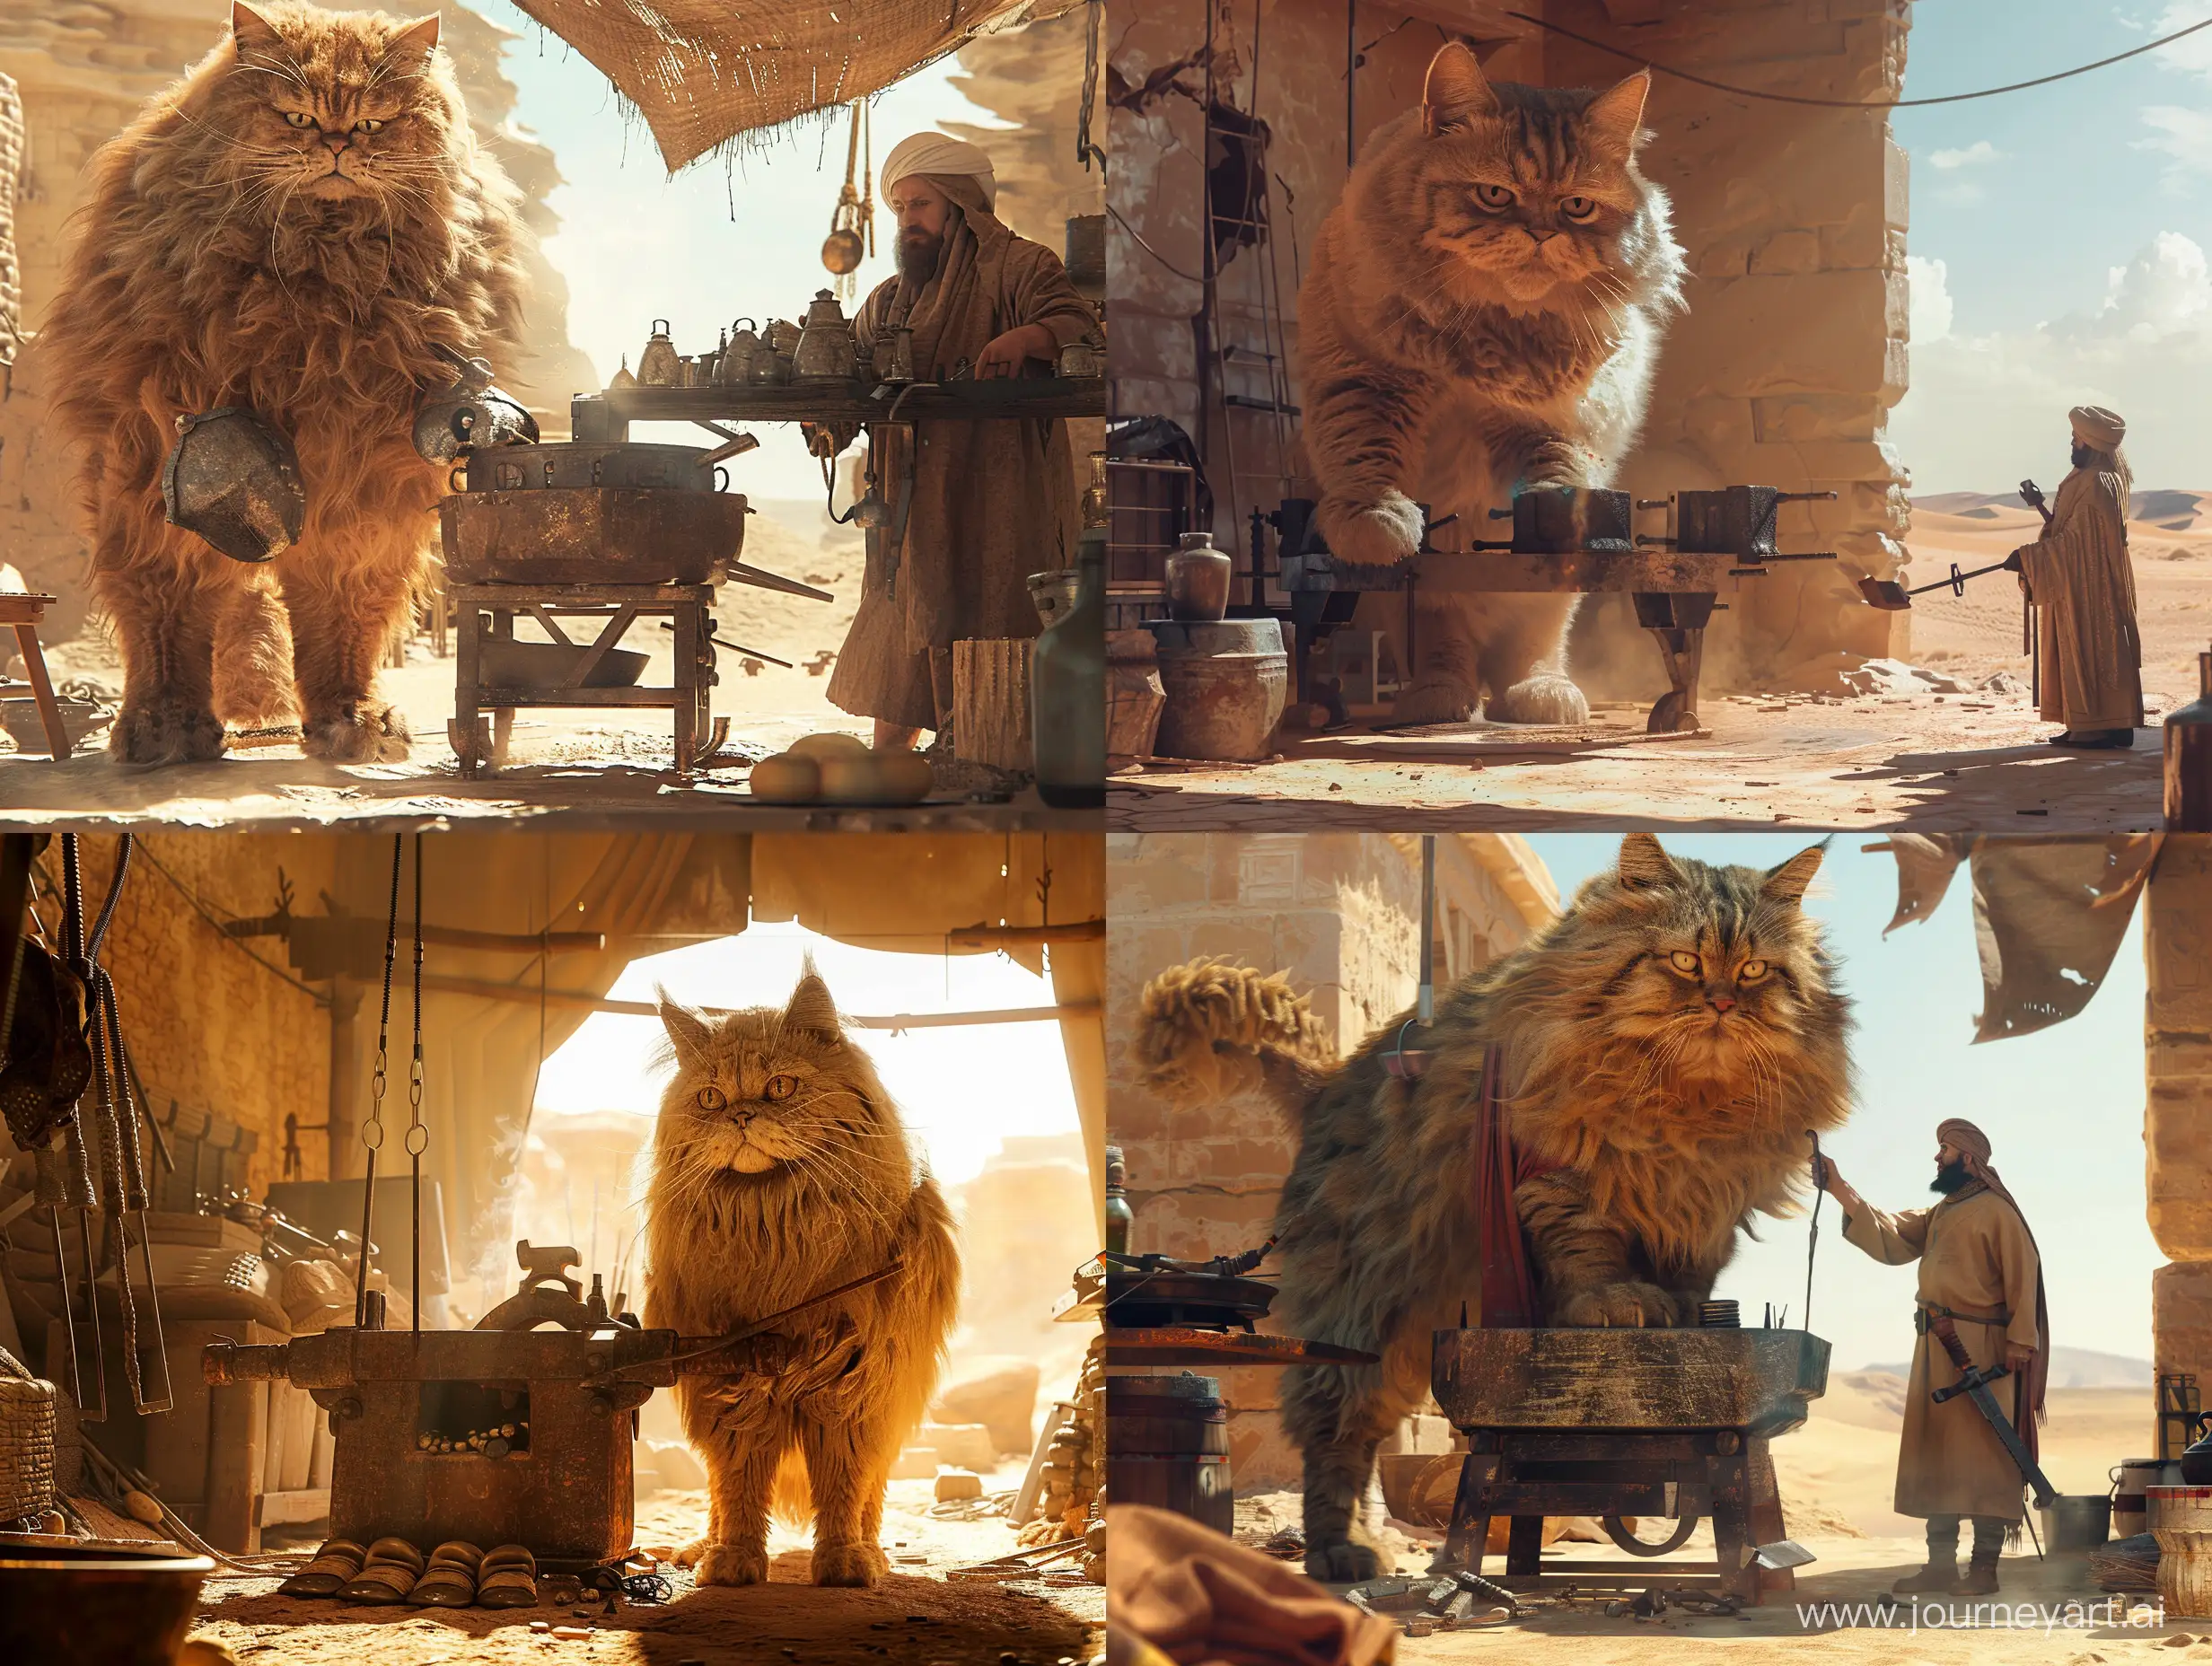 A Persian blacksmith is making iron shoes for a giant Persian cat, the size of a Persian cat is the size of a horse, standing in the forge. in a desert, in an ancient civilization, cinematic, epic realism,8K, highly detailed, long shot technique, backlit, hard lighting